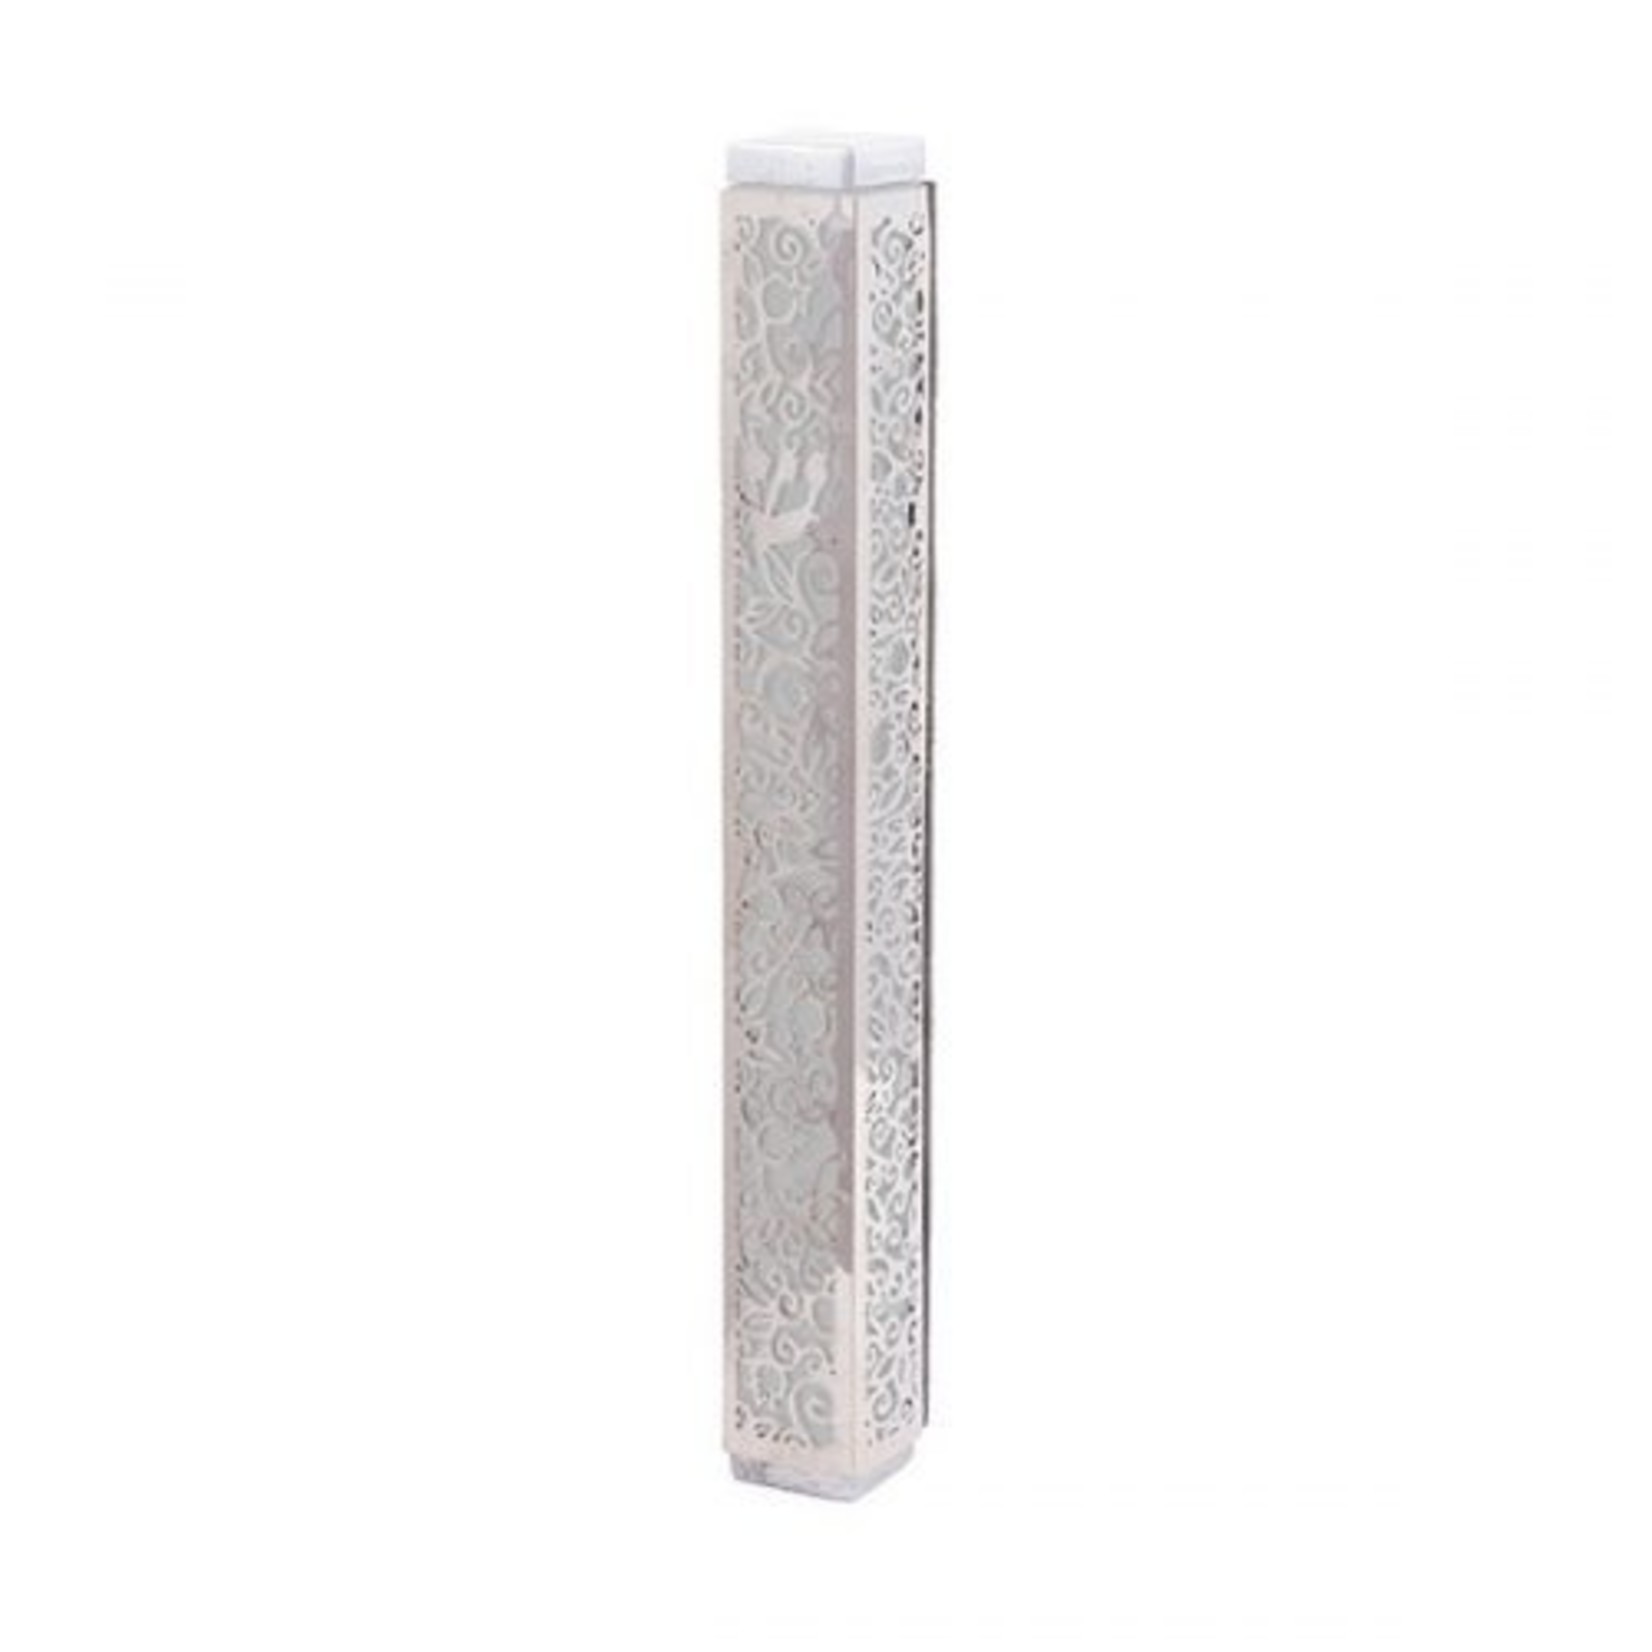 Mezuzah Case with Full Metal Cutout Pomegranate-Silver